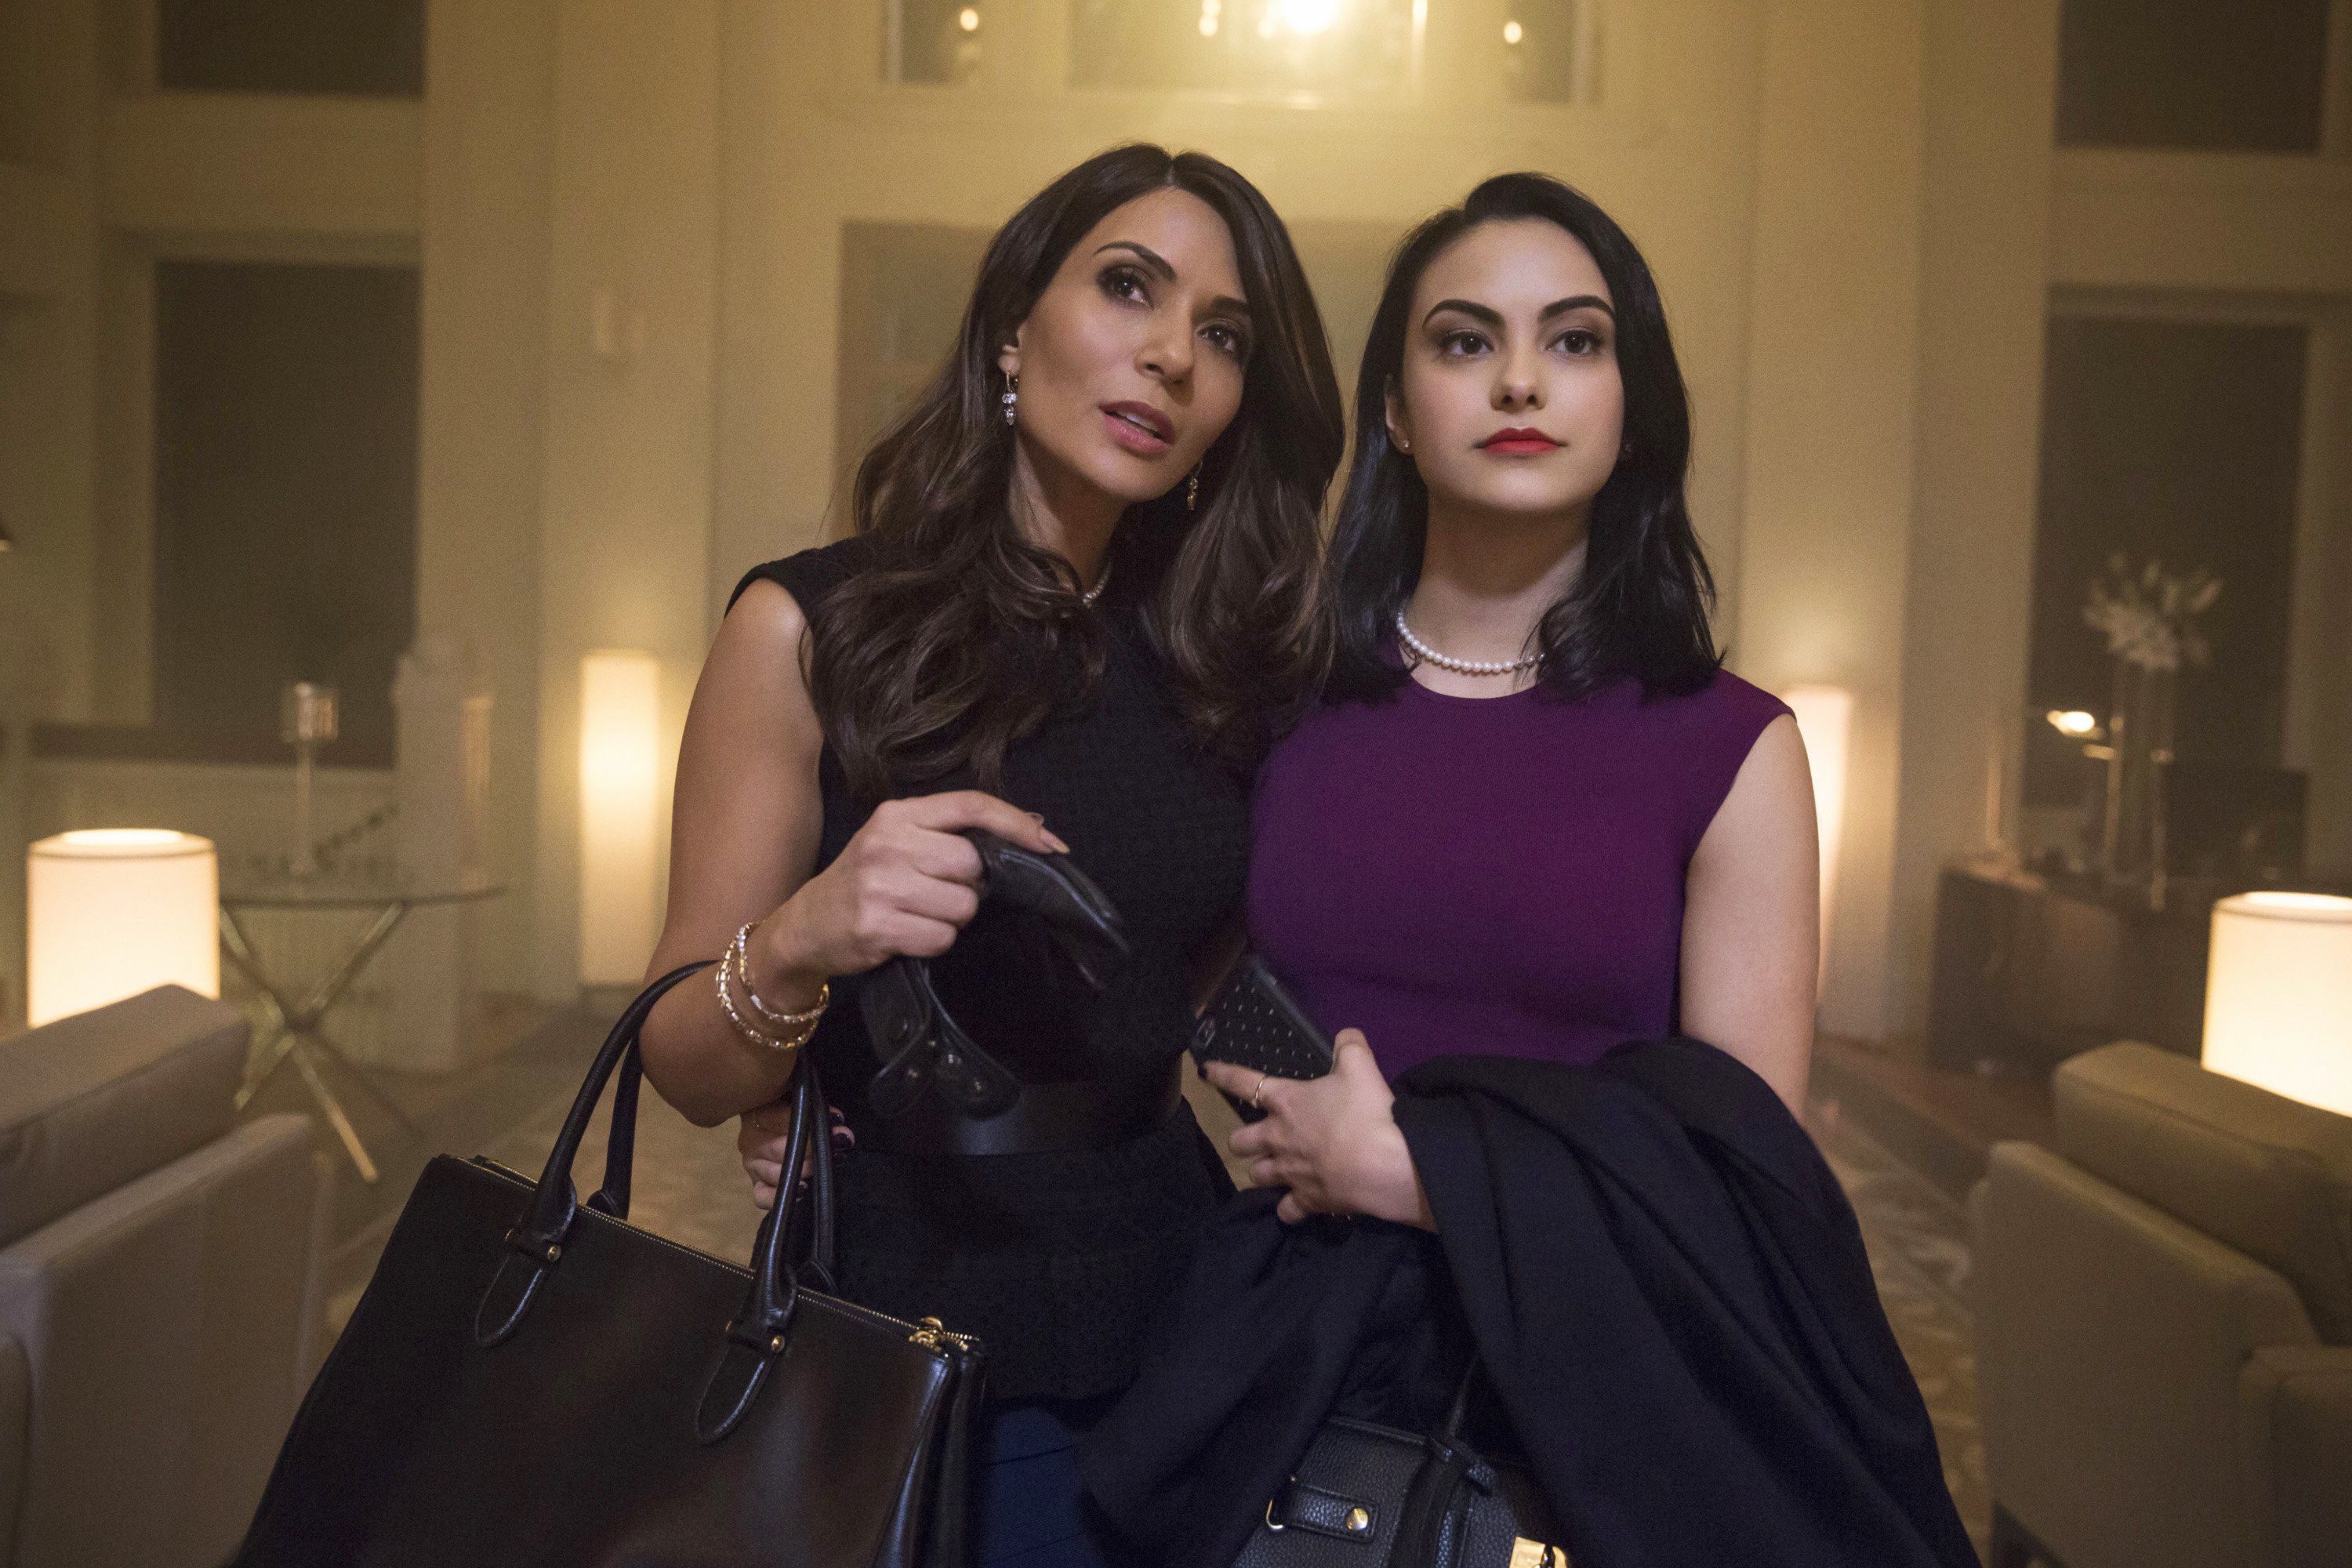 Veronica Lodge and her mom looking sneaky